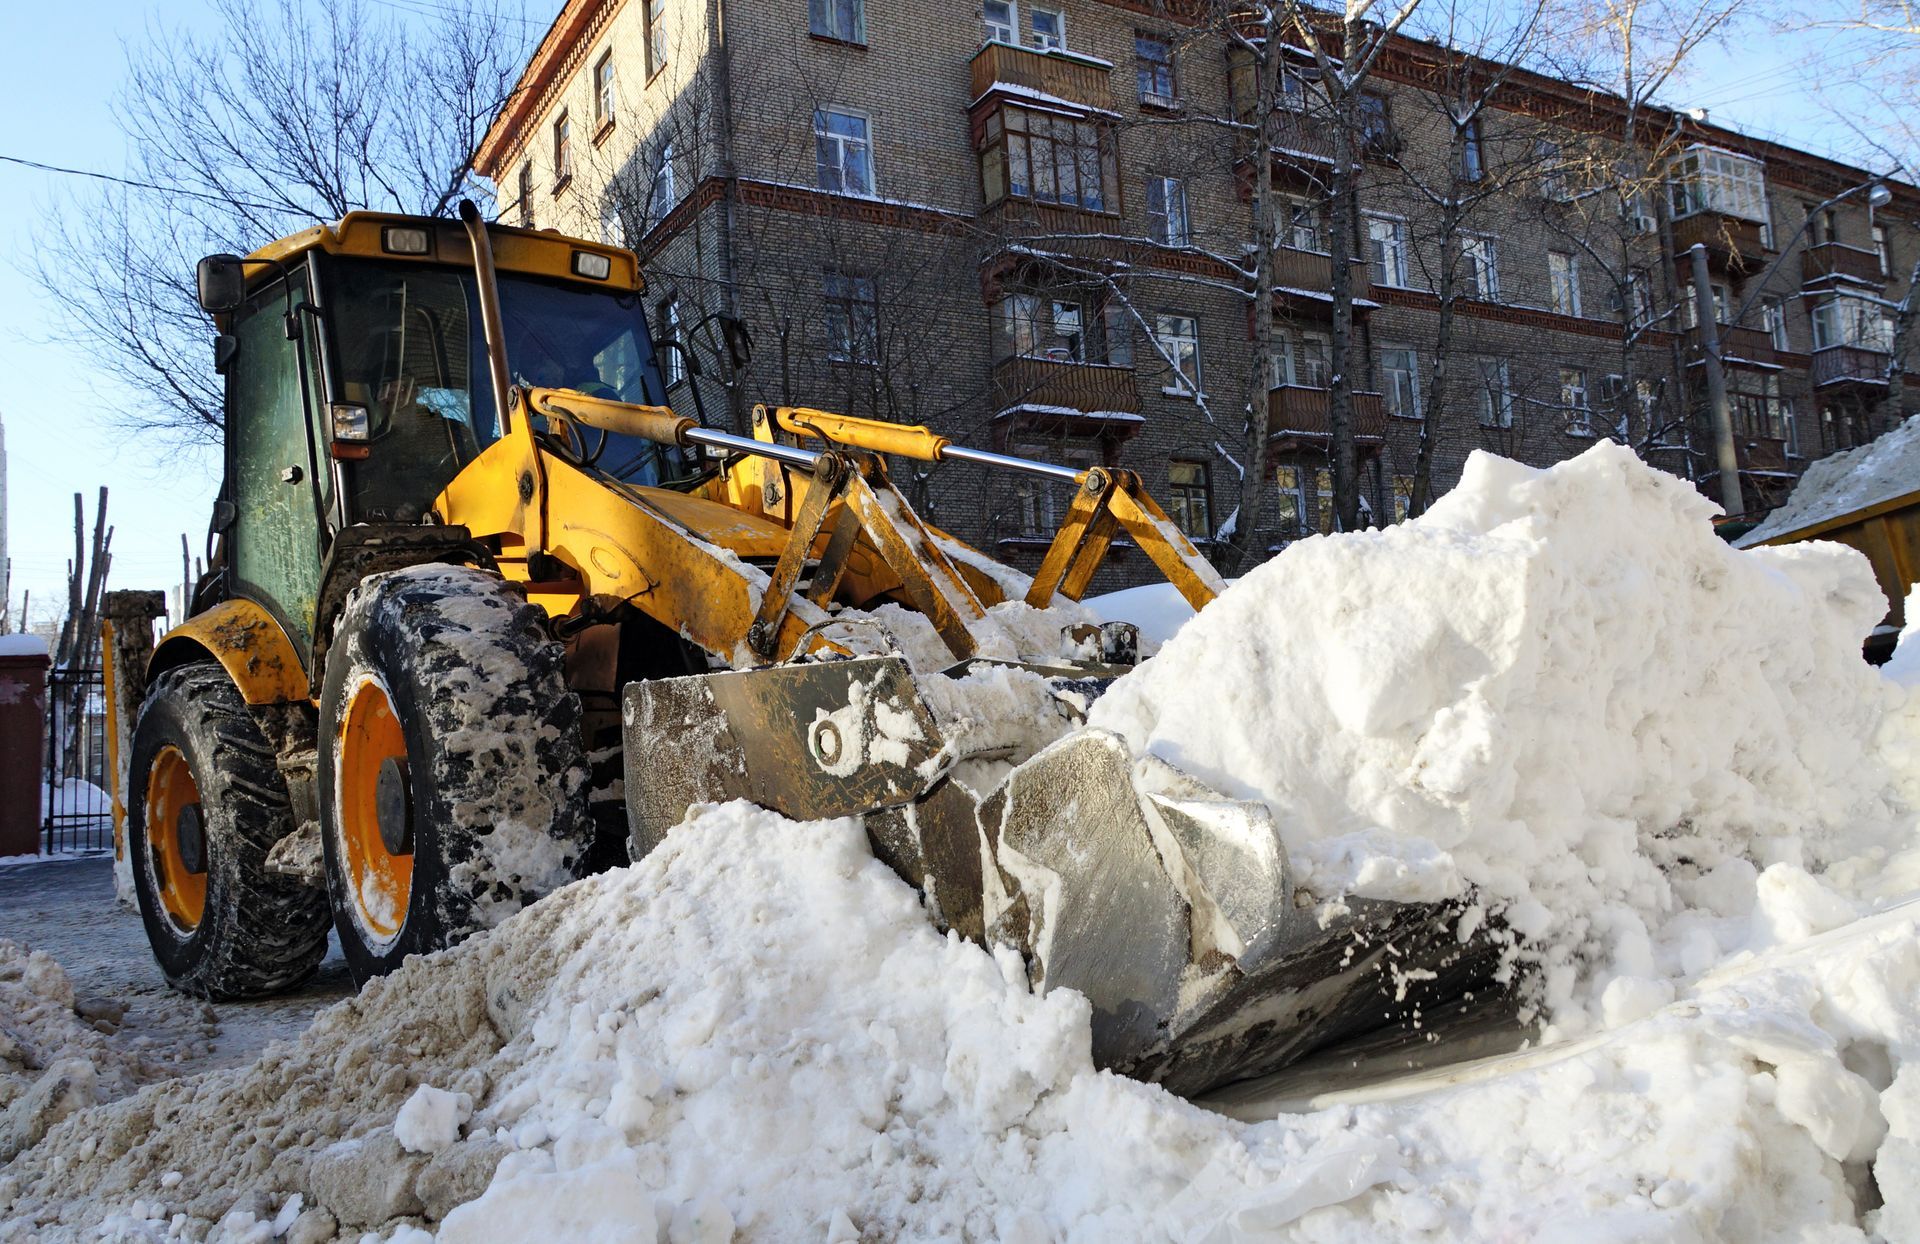 a yellow tractor is loading snow into a dump truck for commercial snow removal